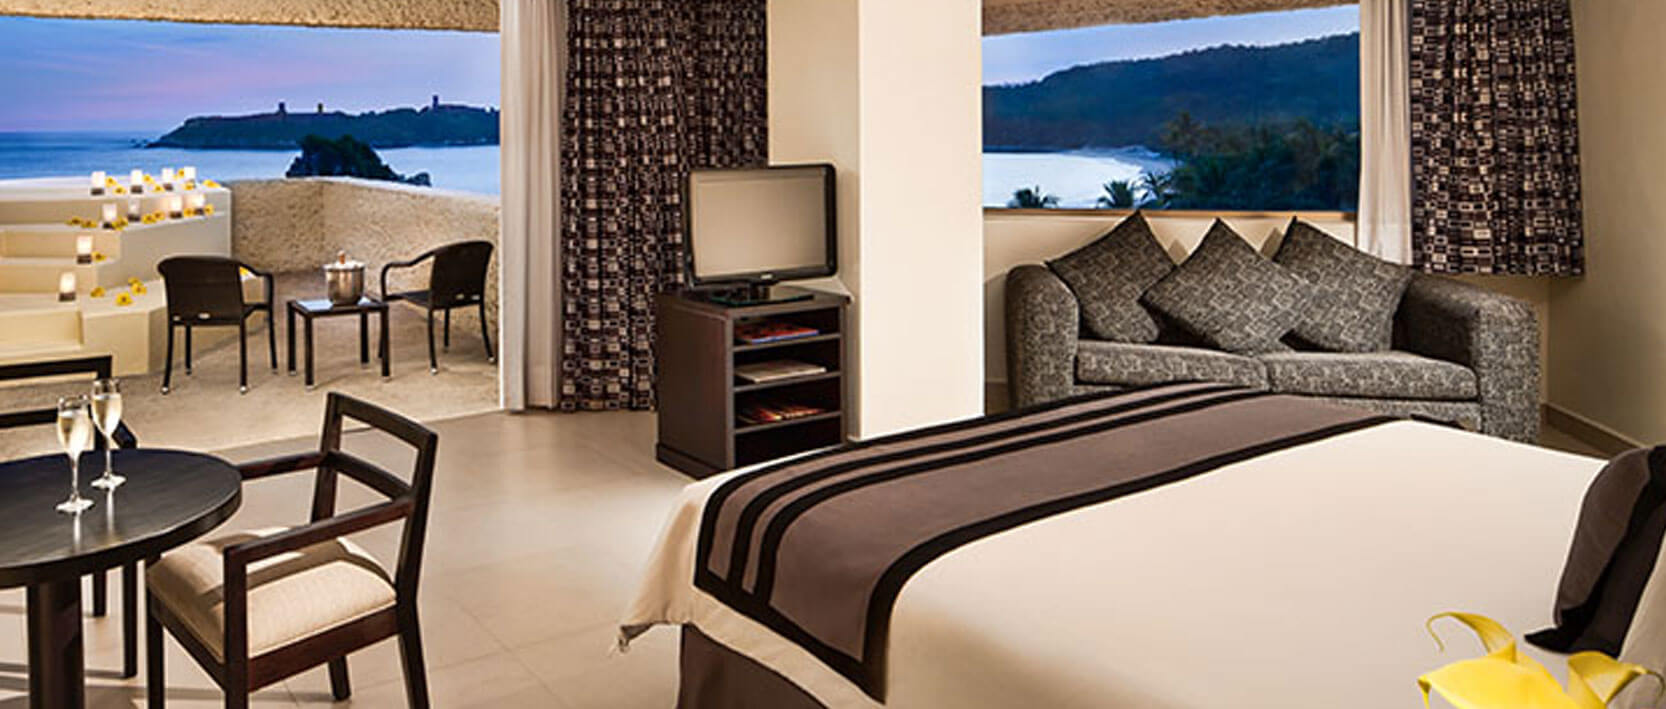 Dreams Huatulco Resort Accommodations - Preferred Club Junior Suite with Jacuzzi